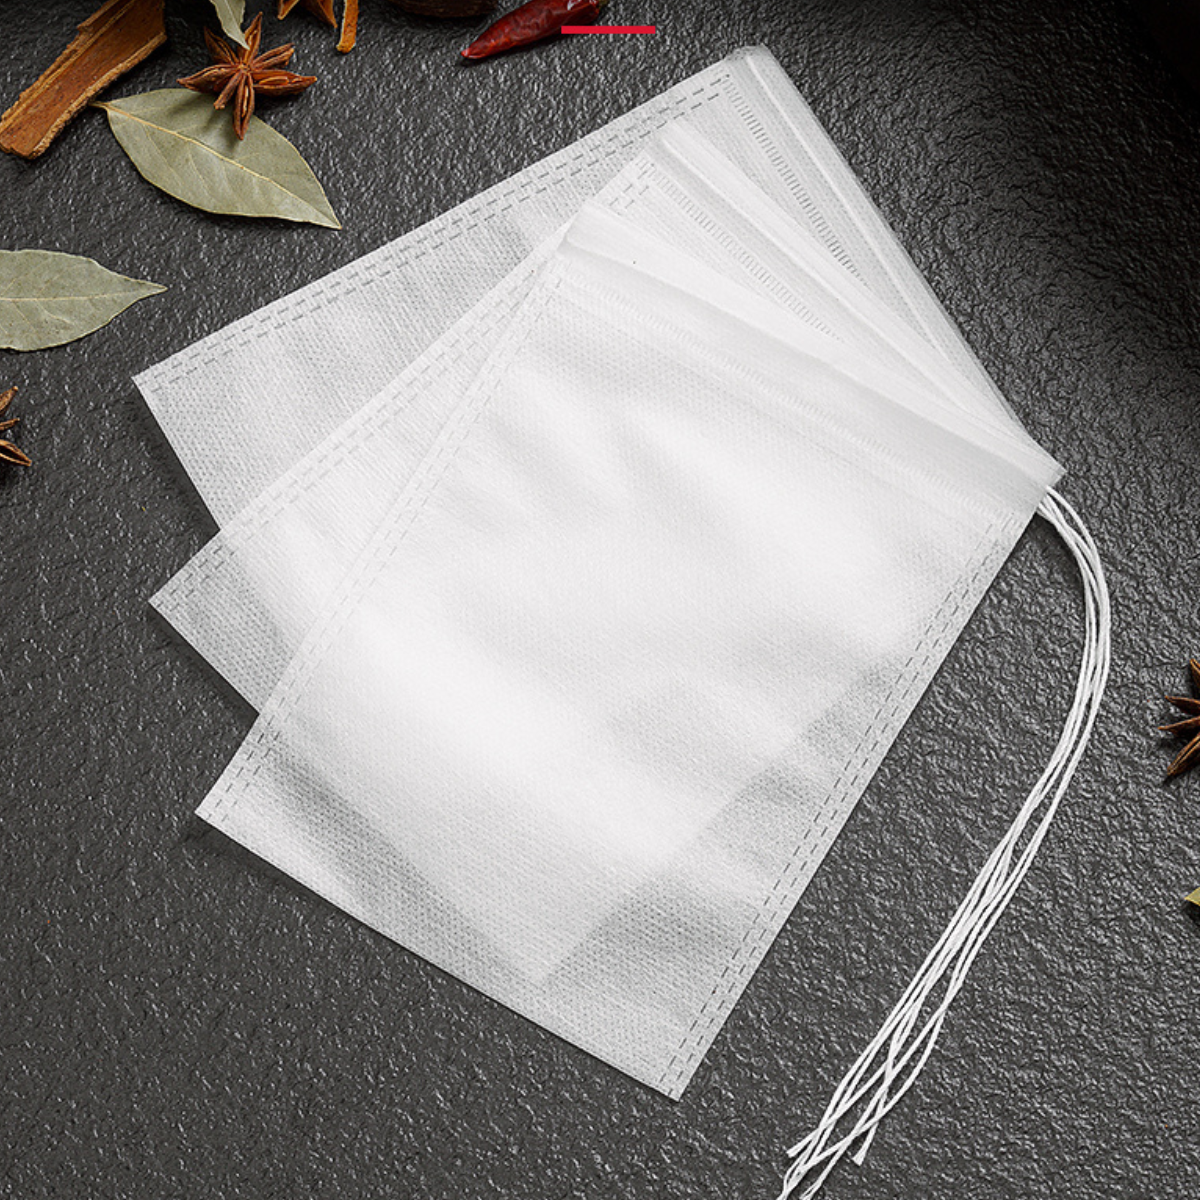 Disposable Drawstring Filter Bags for Spices, Herbs, Tea, Coffee, and Cooking (100 Count)